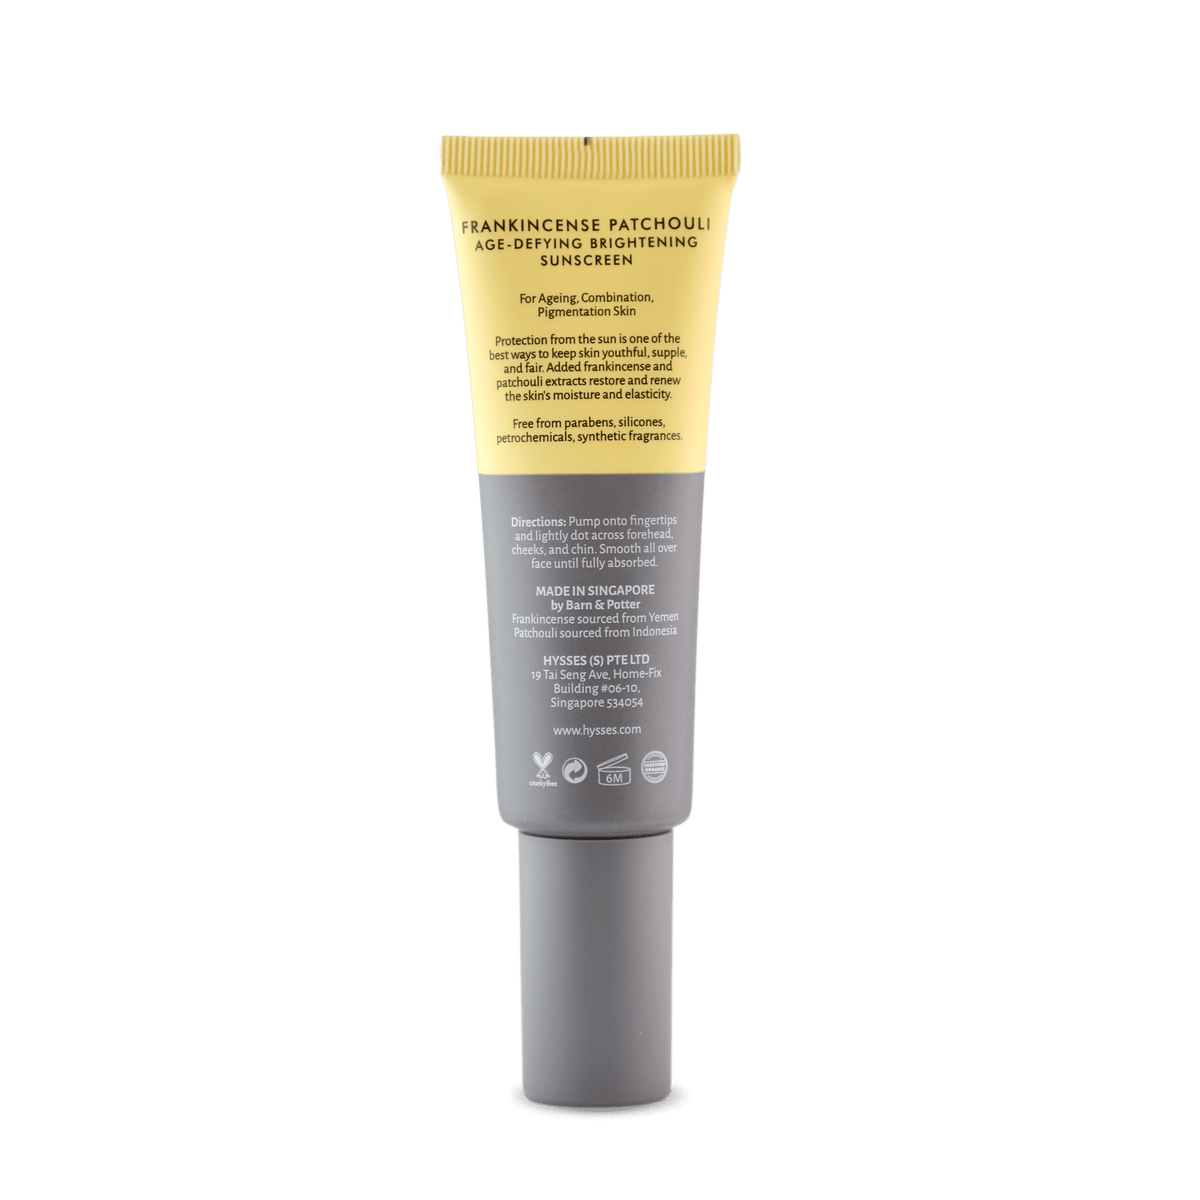 Hysses Face Care Age Defying Brightening Sunscreen Frankincense Patchouli SPF 40 / PA++